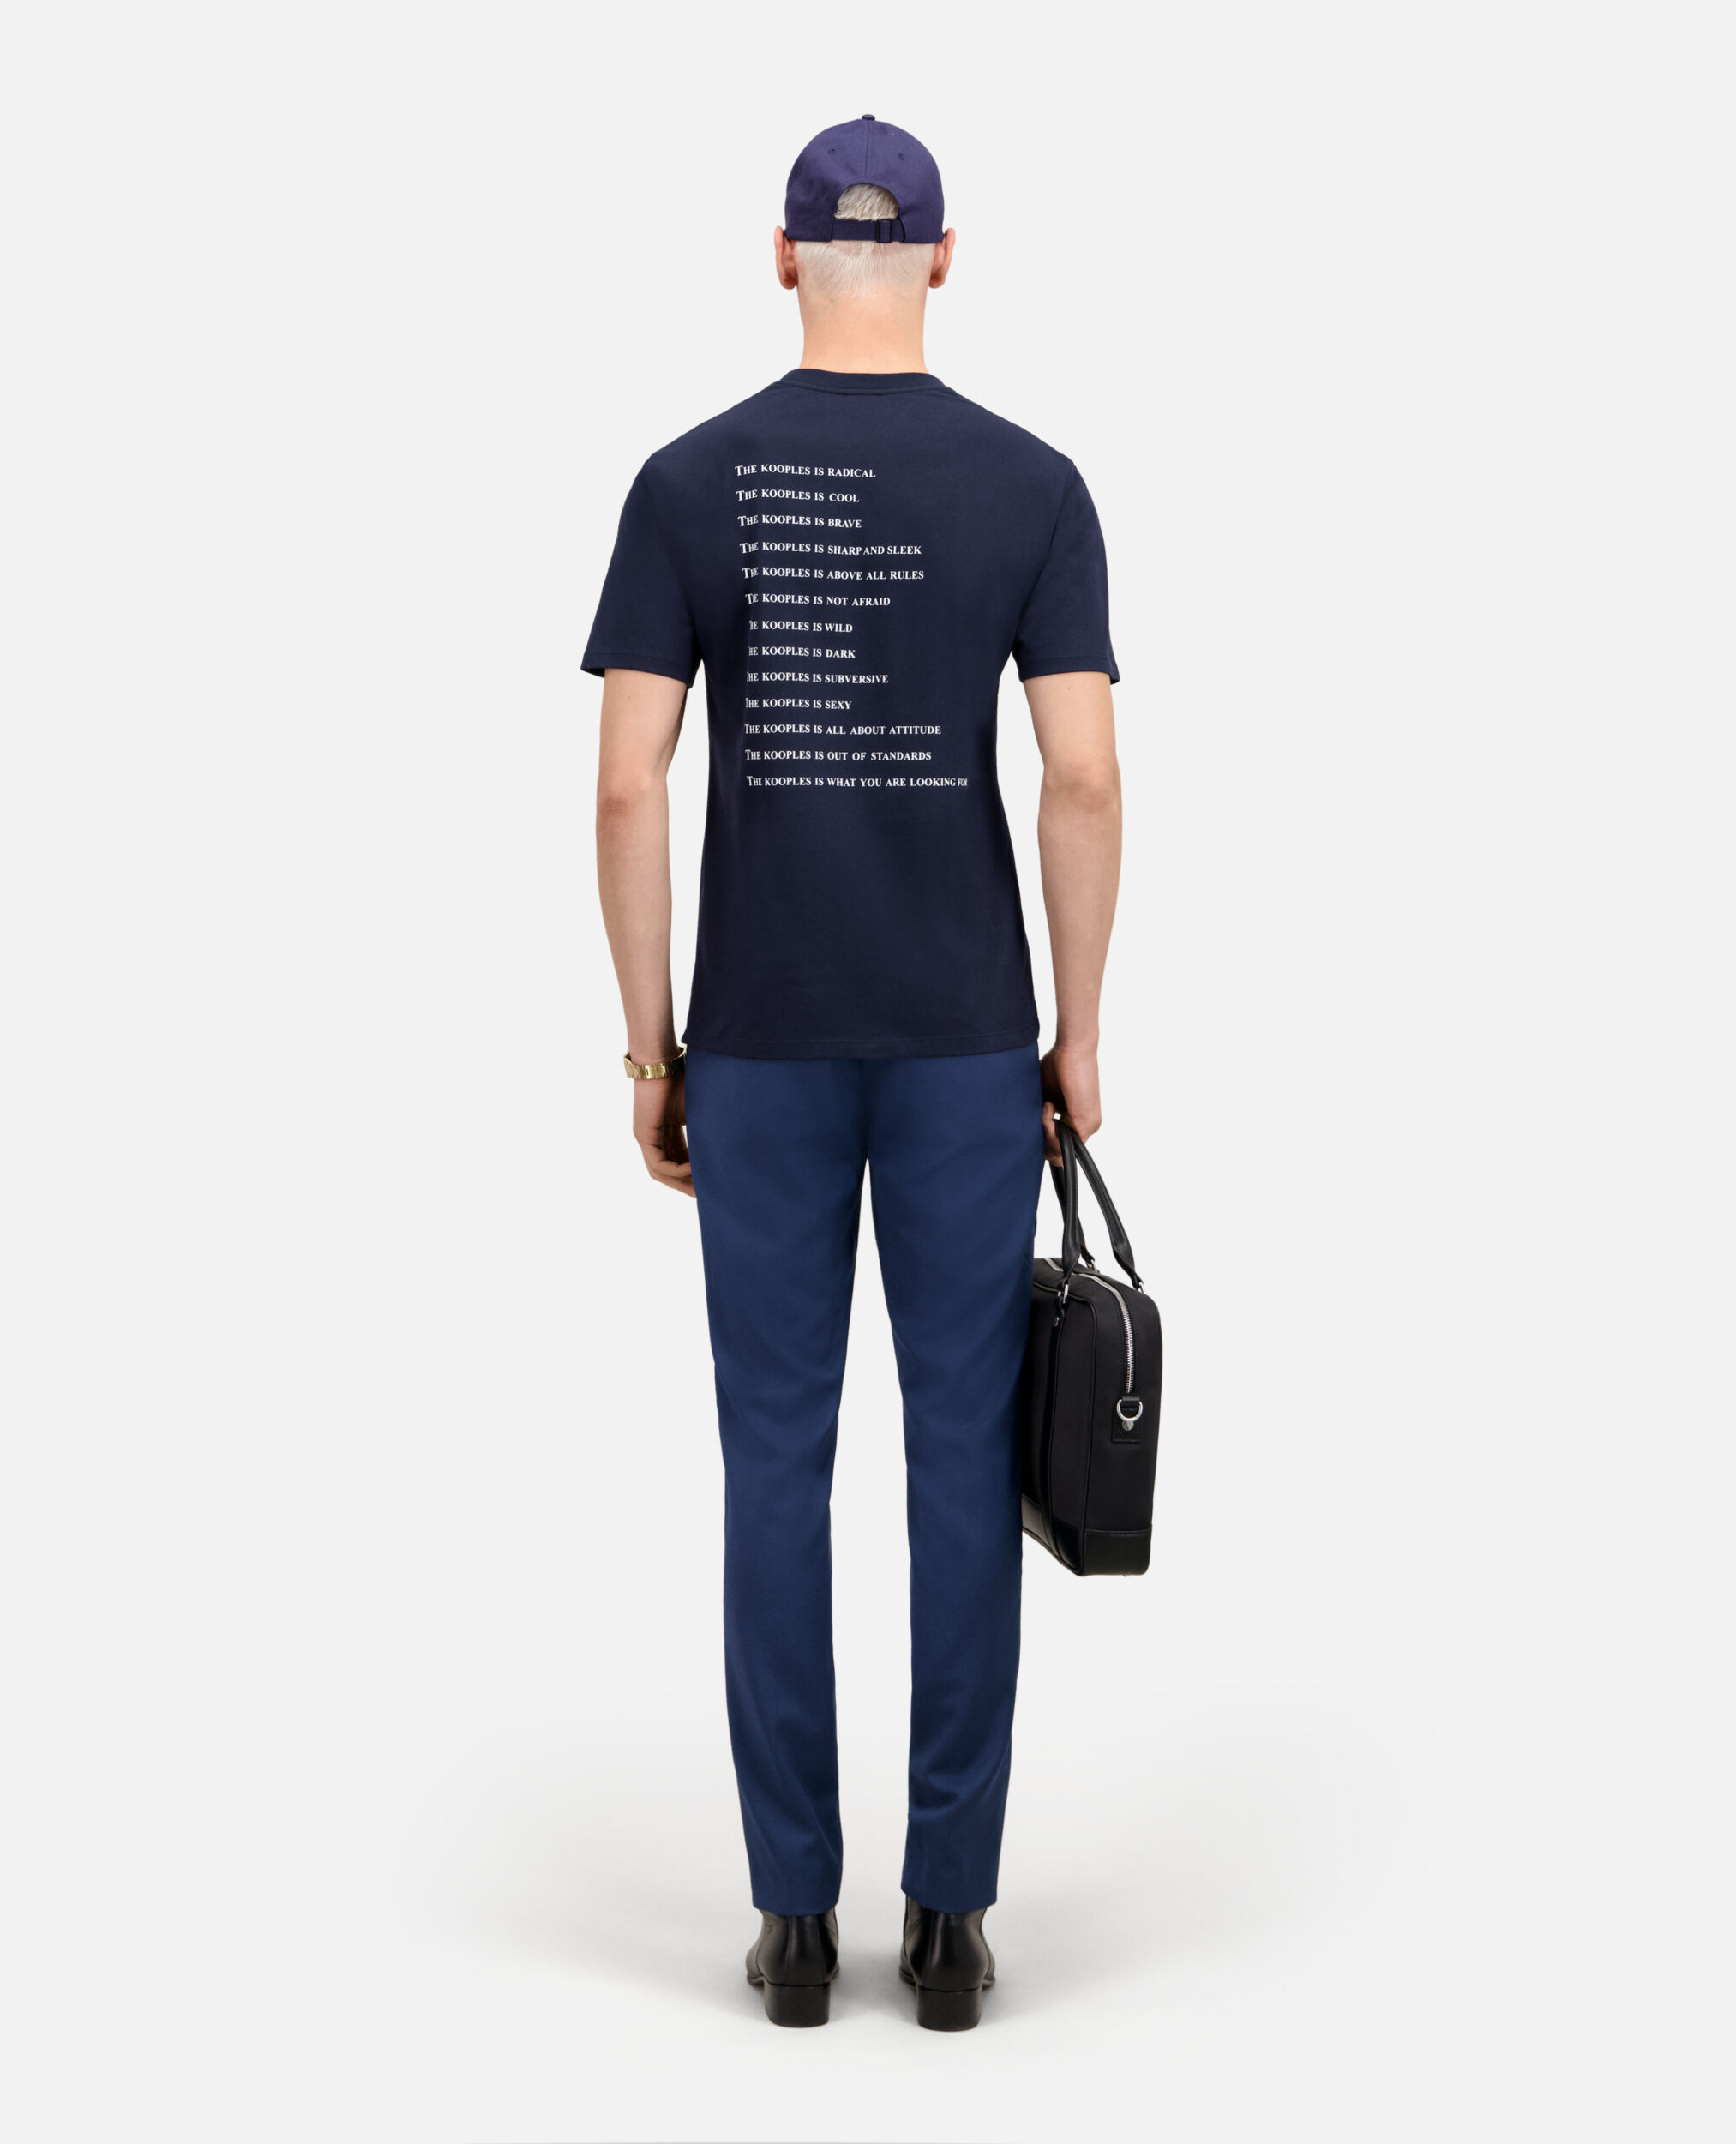 Camiseta What is azul para hombre, NAVY, hi-res image number null